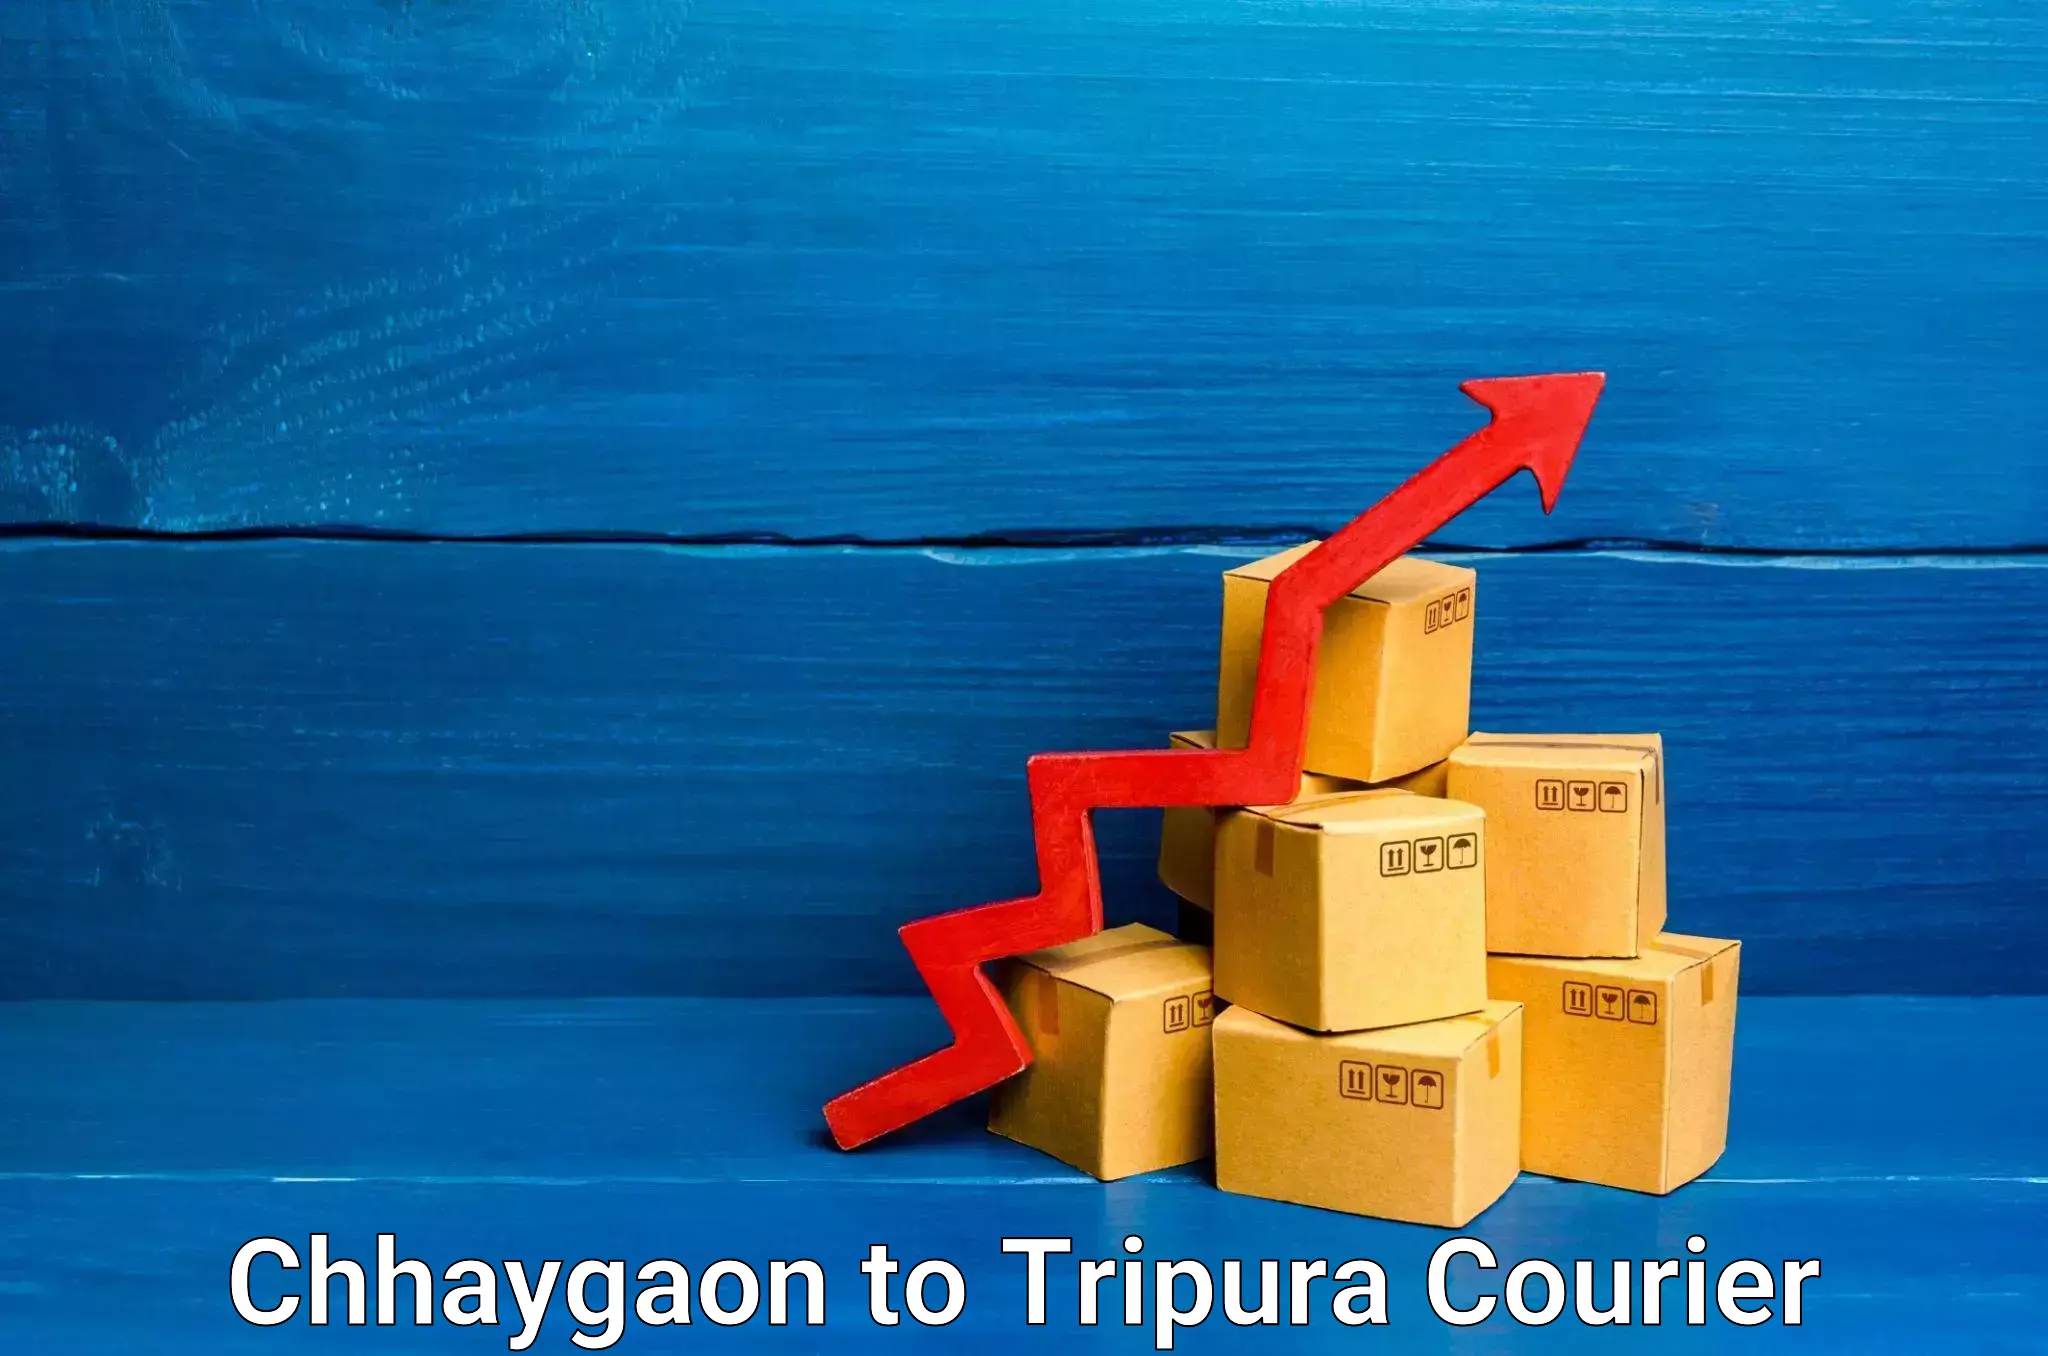 Courier service innovation Chhaygaon to Agartala